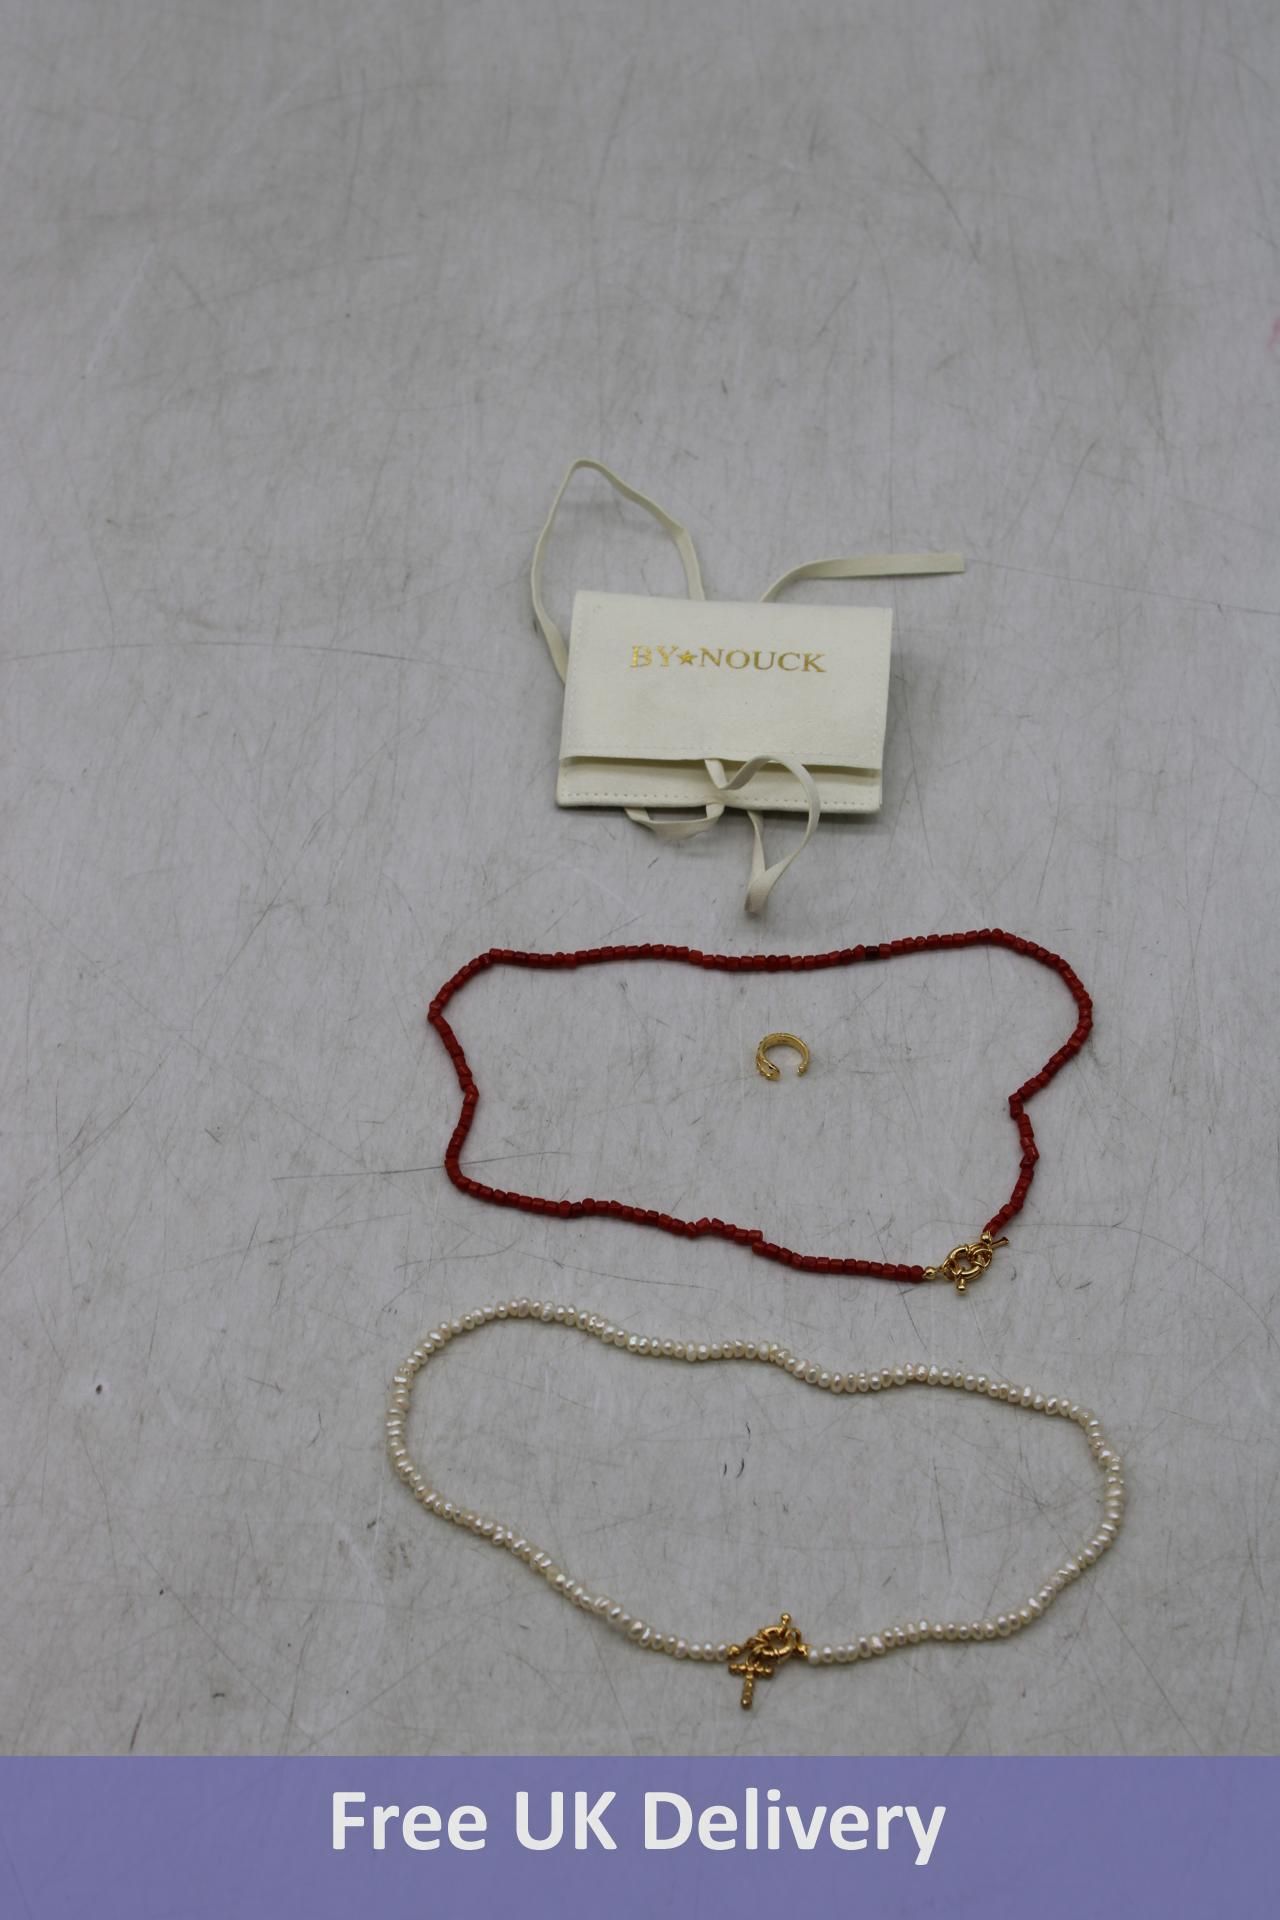 Three Pieces of By Nouck Jewellery to include 1x Ear Cuff 'Studs', 1x Glass Pearl Choker Necklace wi